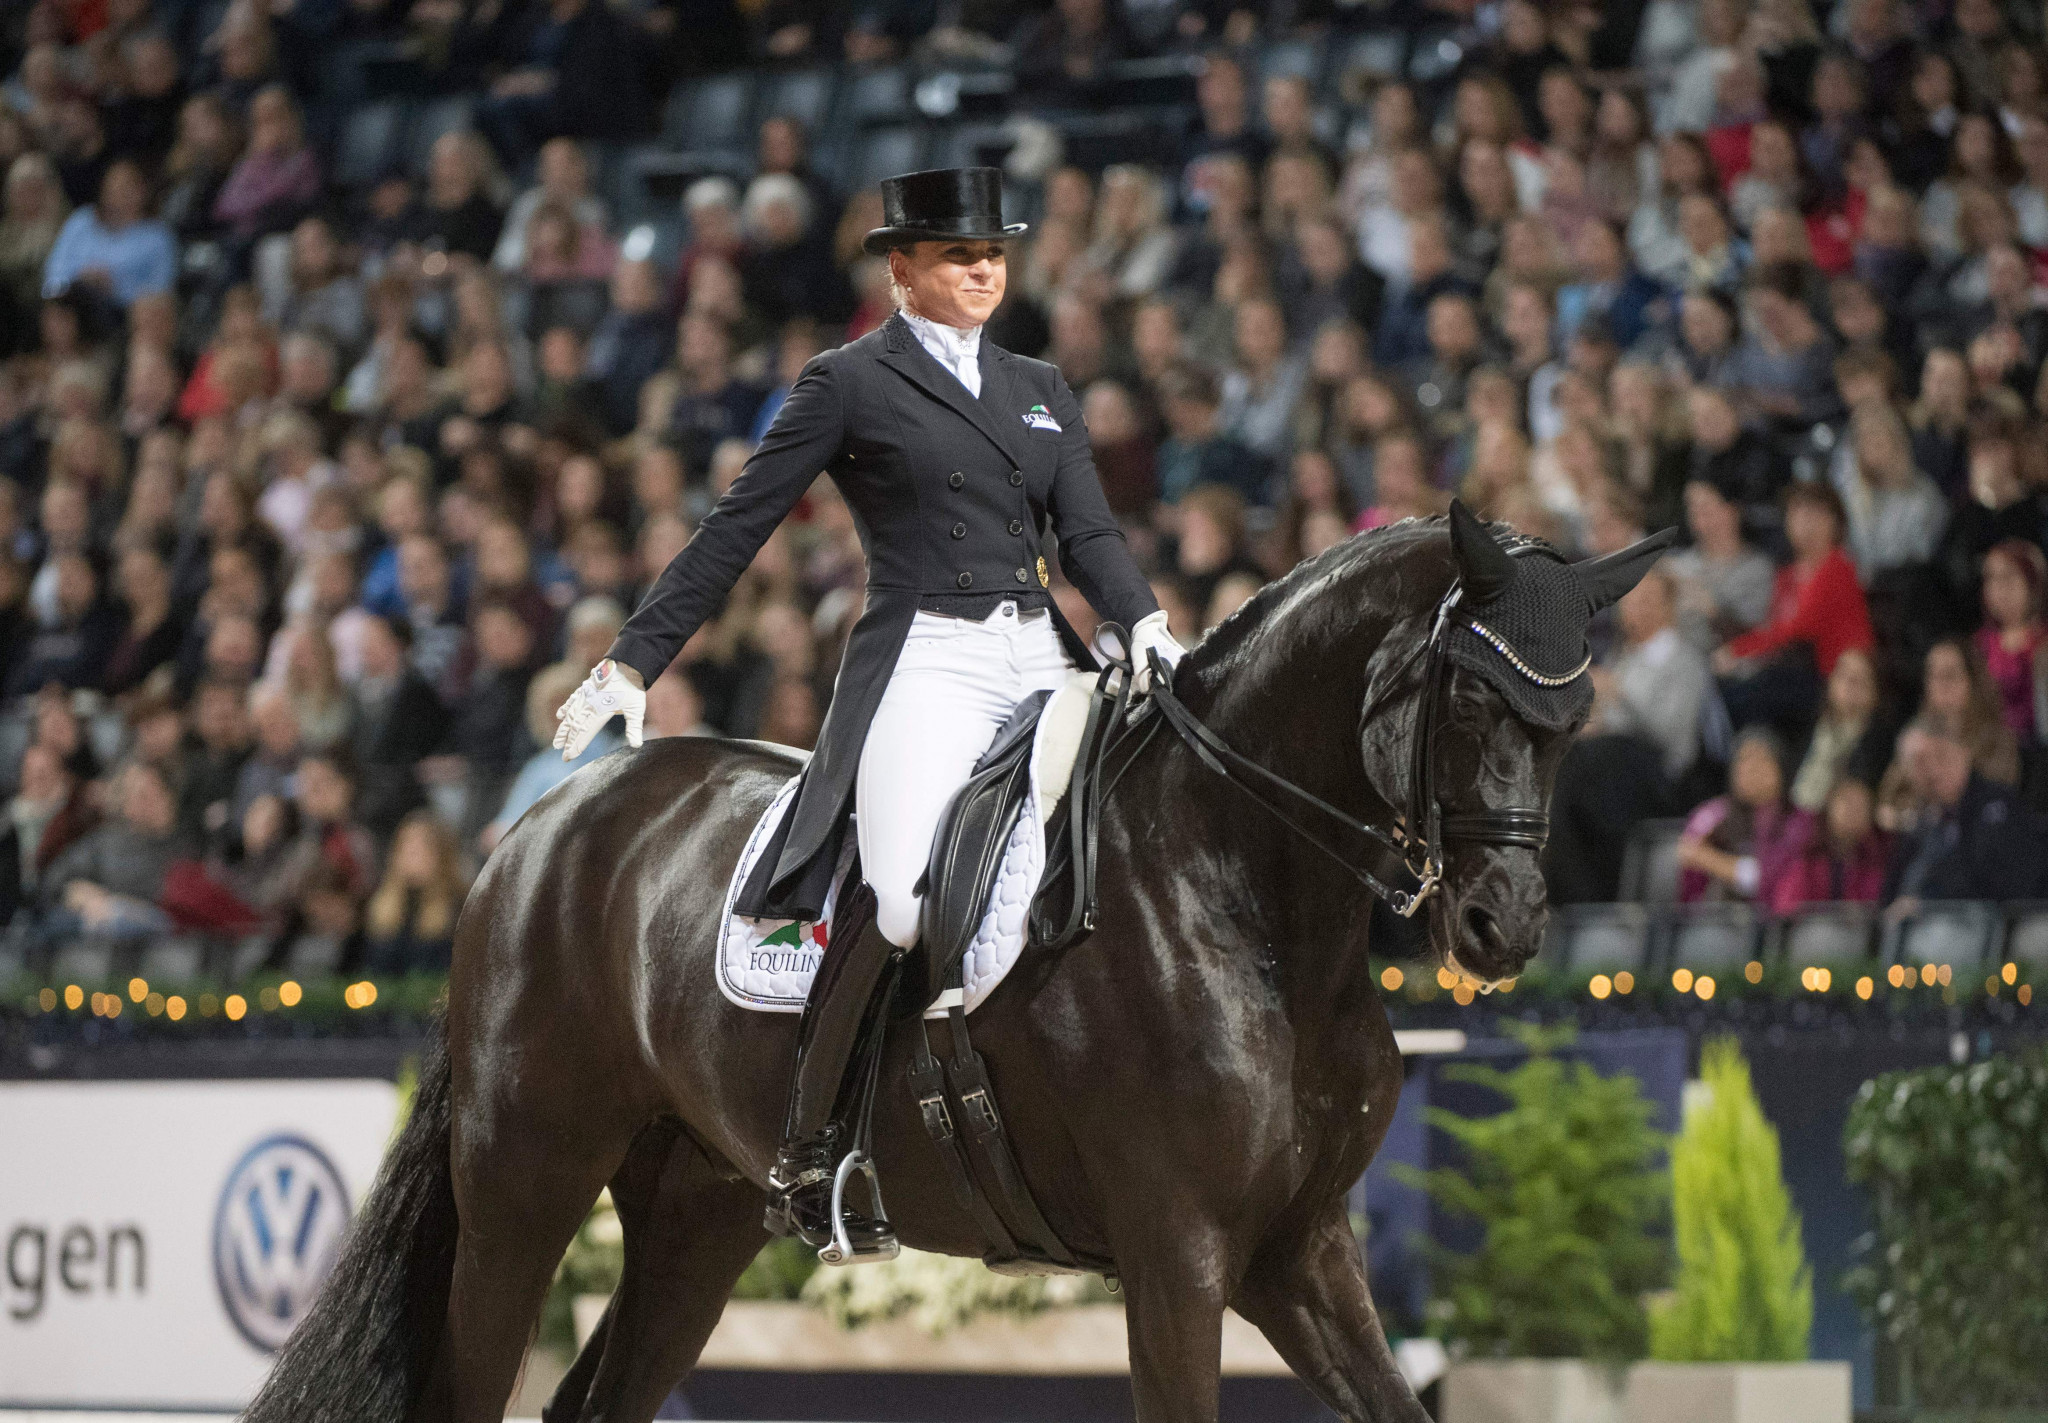 German riders dominate podium at FEI Dressage World Cup in Amsterdam